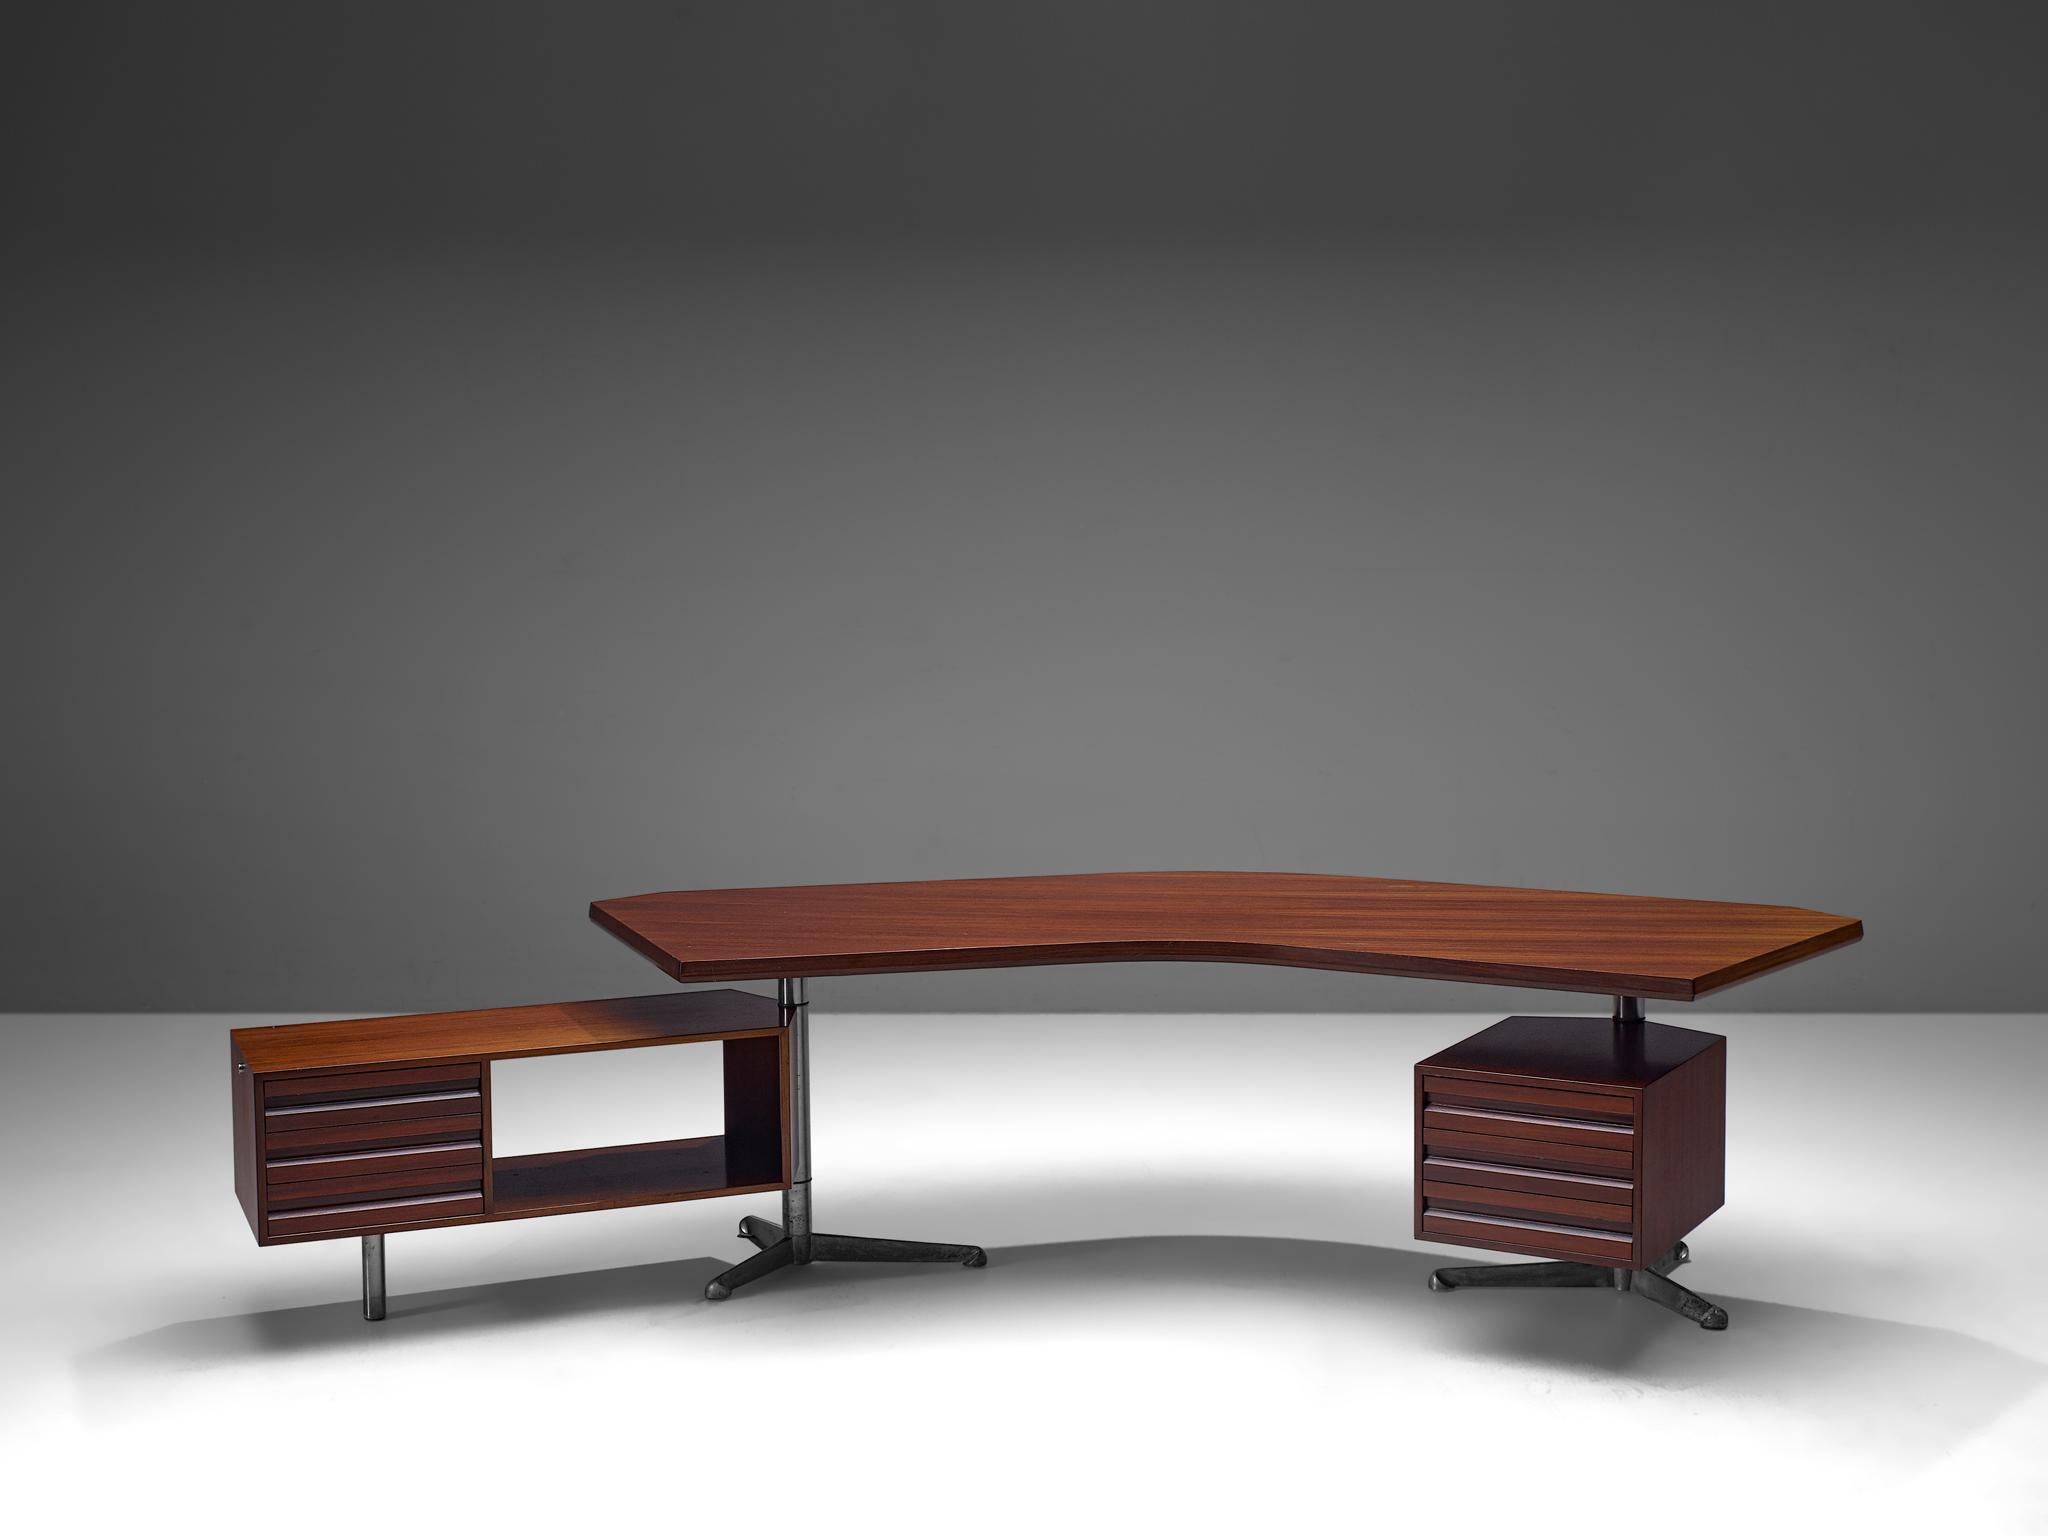 Osvaldo Borsani for Tecno, desk T-96 'Boomerang', rosewood, metal, Italy 1956.

This boomerang shaped desk is designed by Osvaldo Borsani. The two revolving cabinets are held in place by the characteristic stainless steel tripods. The top has the